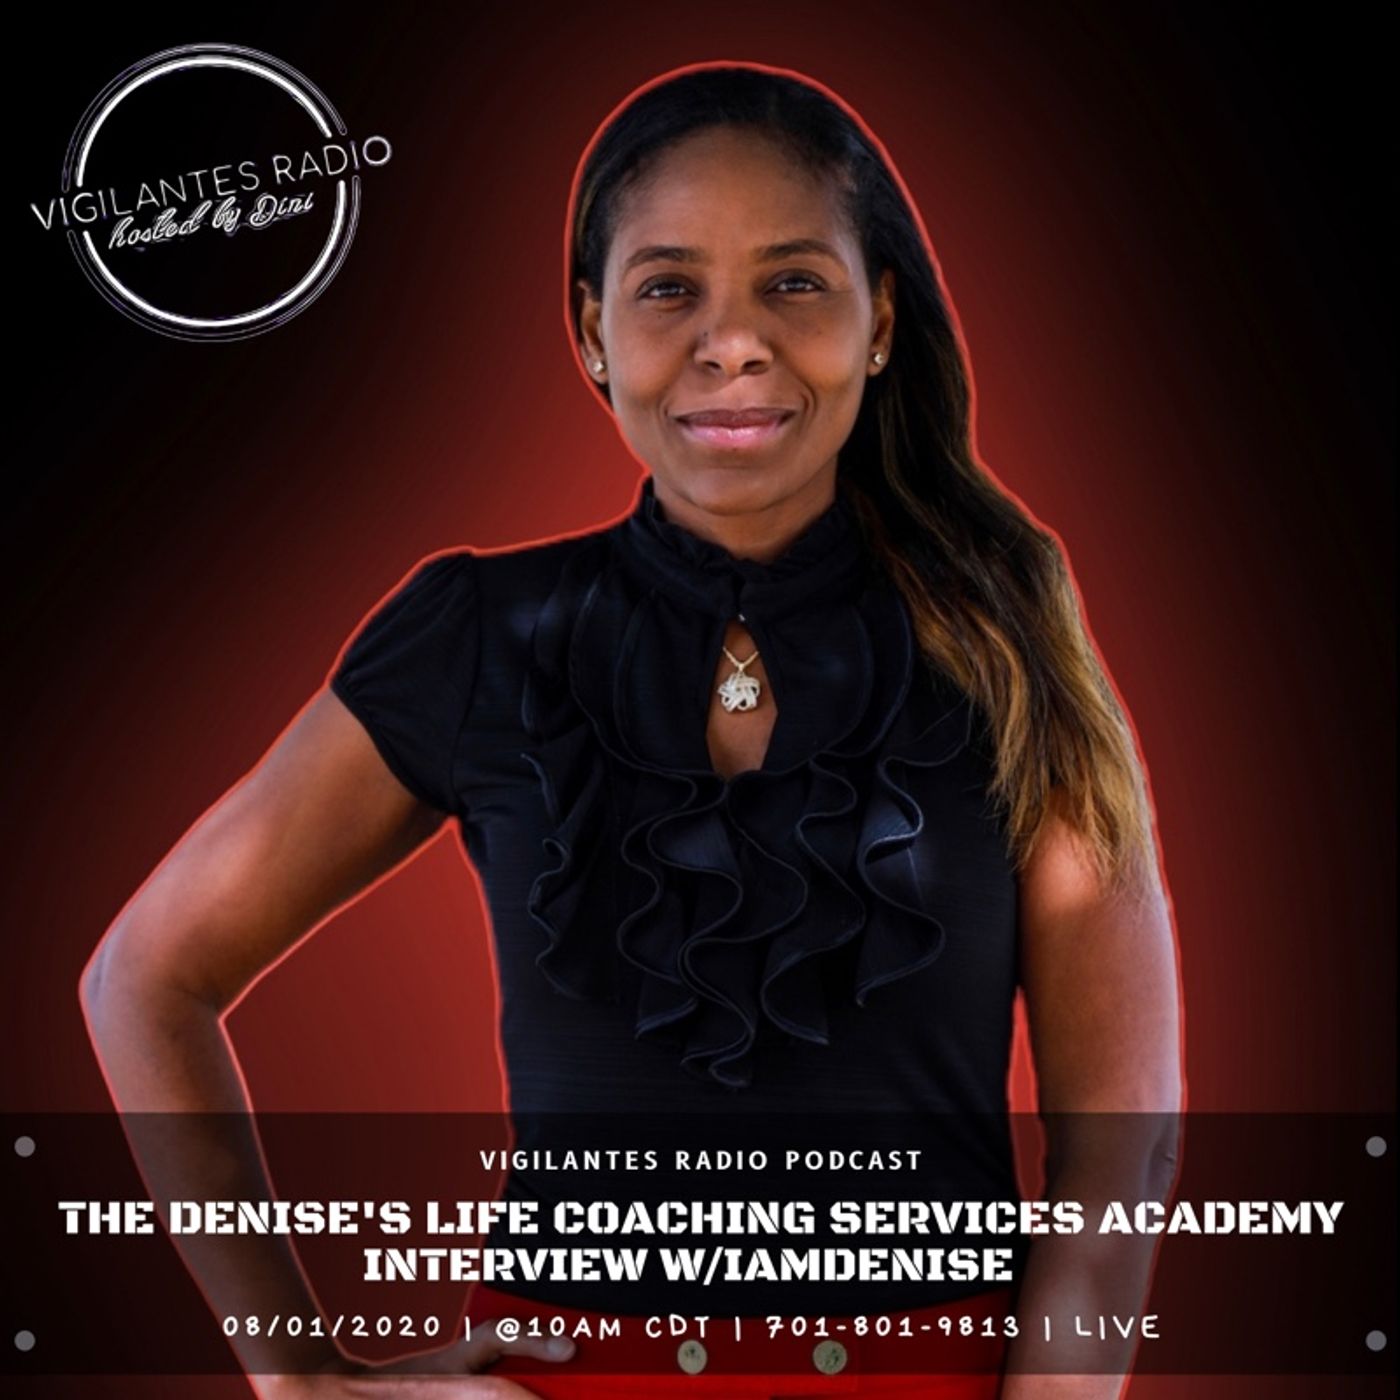 The Denise's Life Coaching Services Academy Interview w/IAmDenise. Image